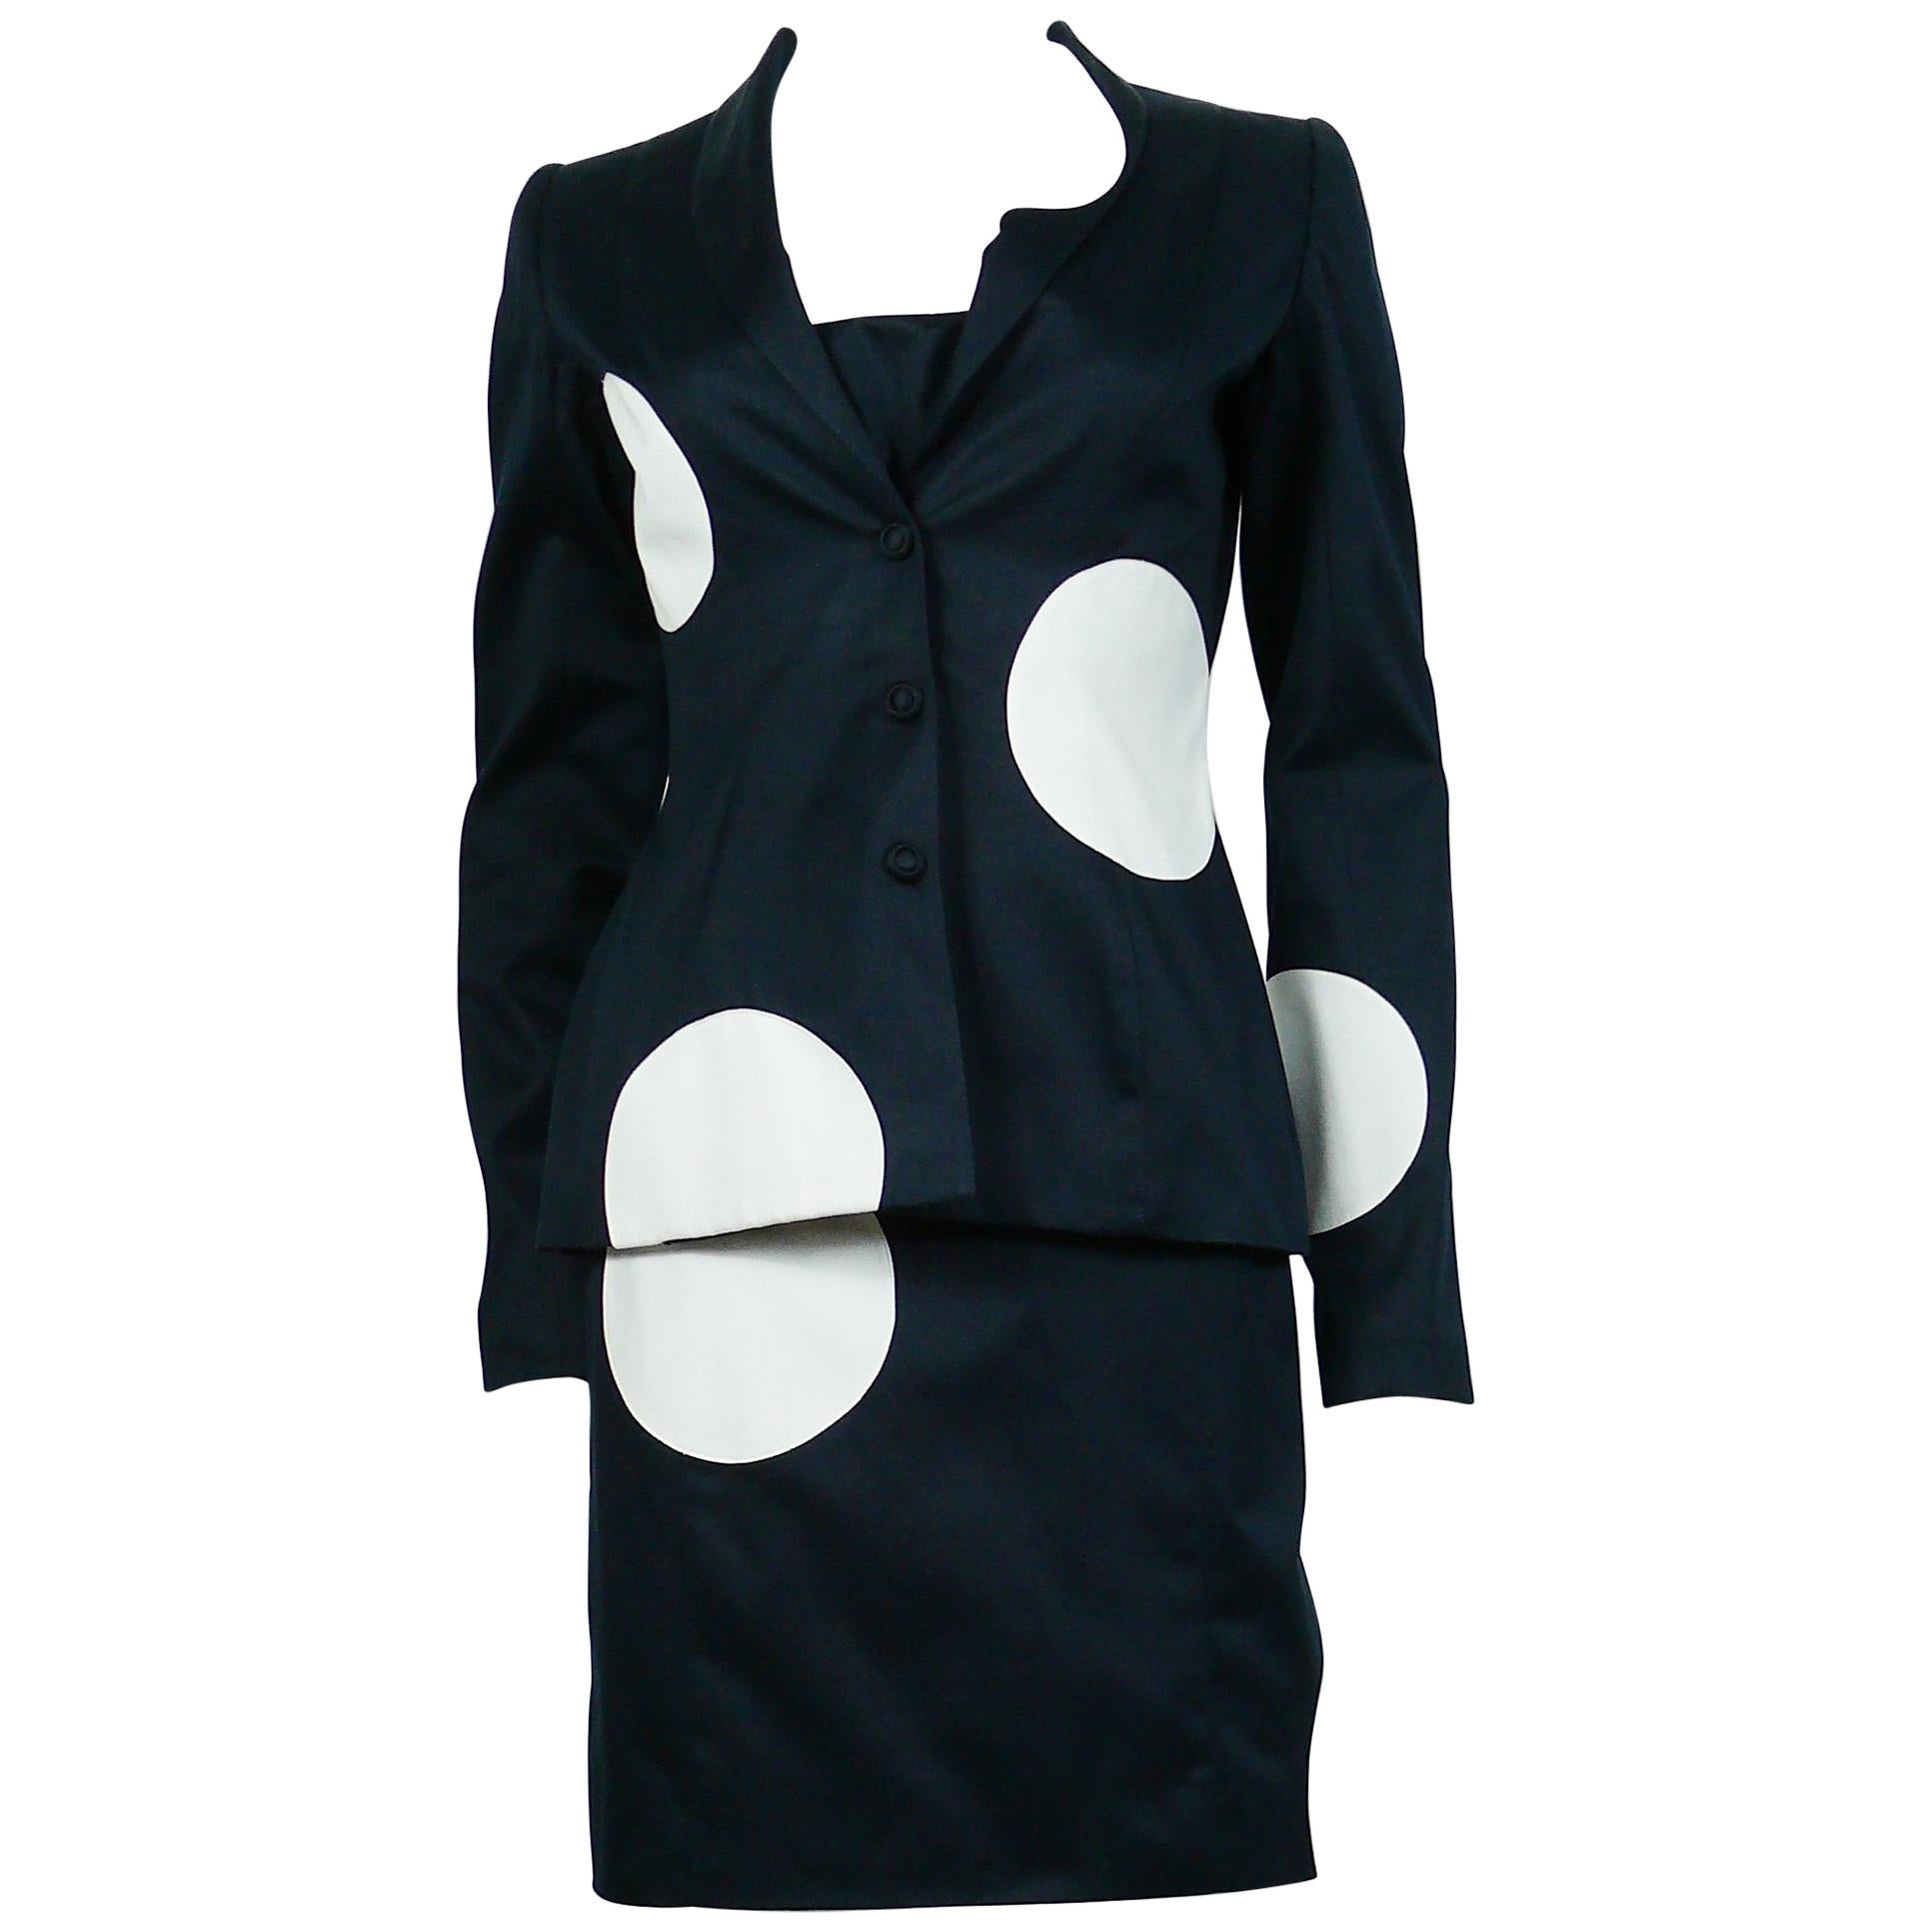 Thierry Mugler Vintage Polka Dot Bustier Dress and Blazer Suit For Sale